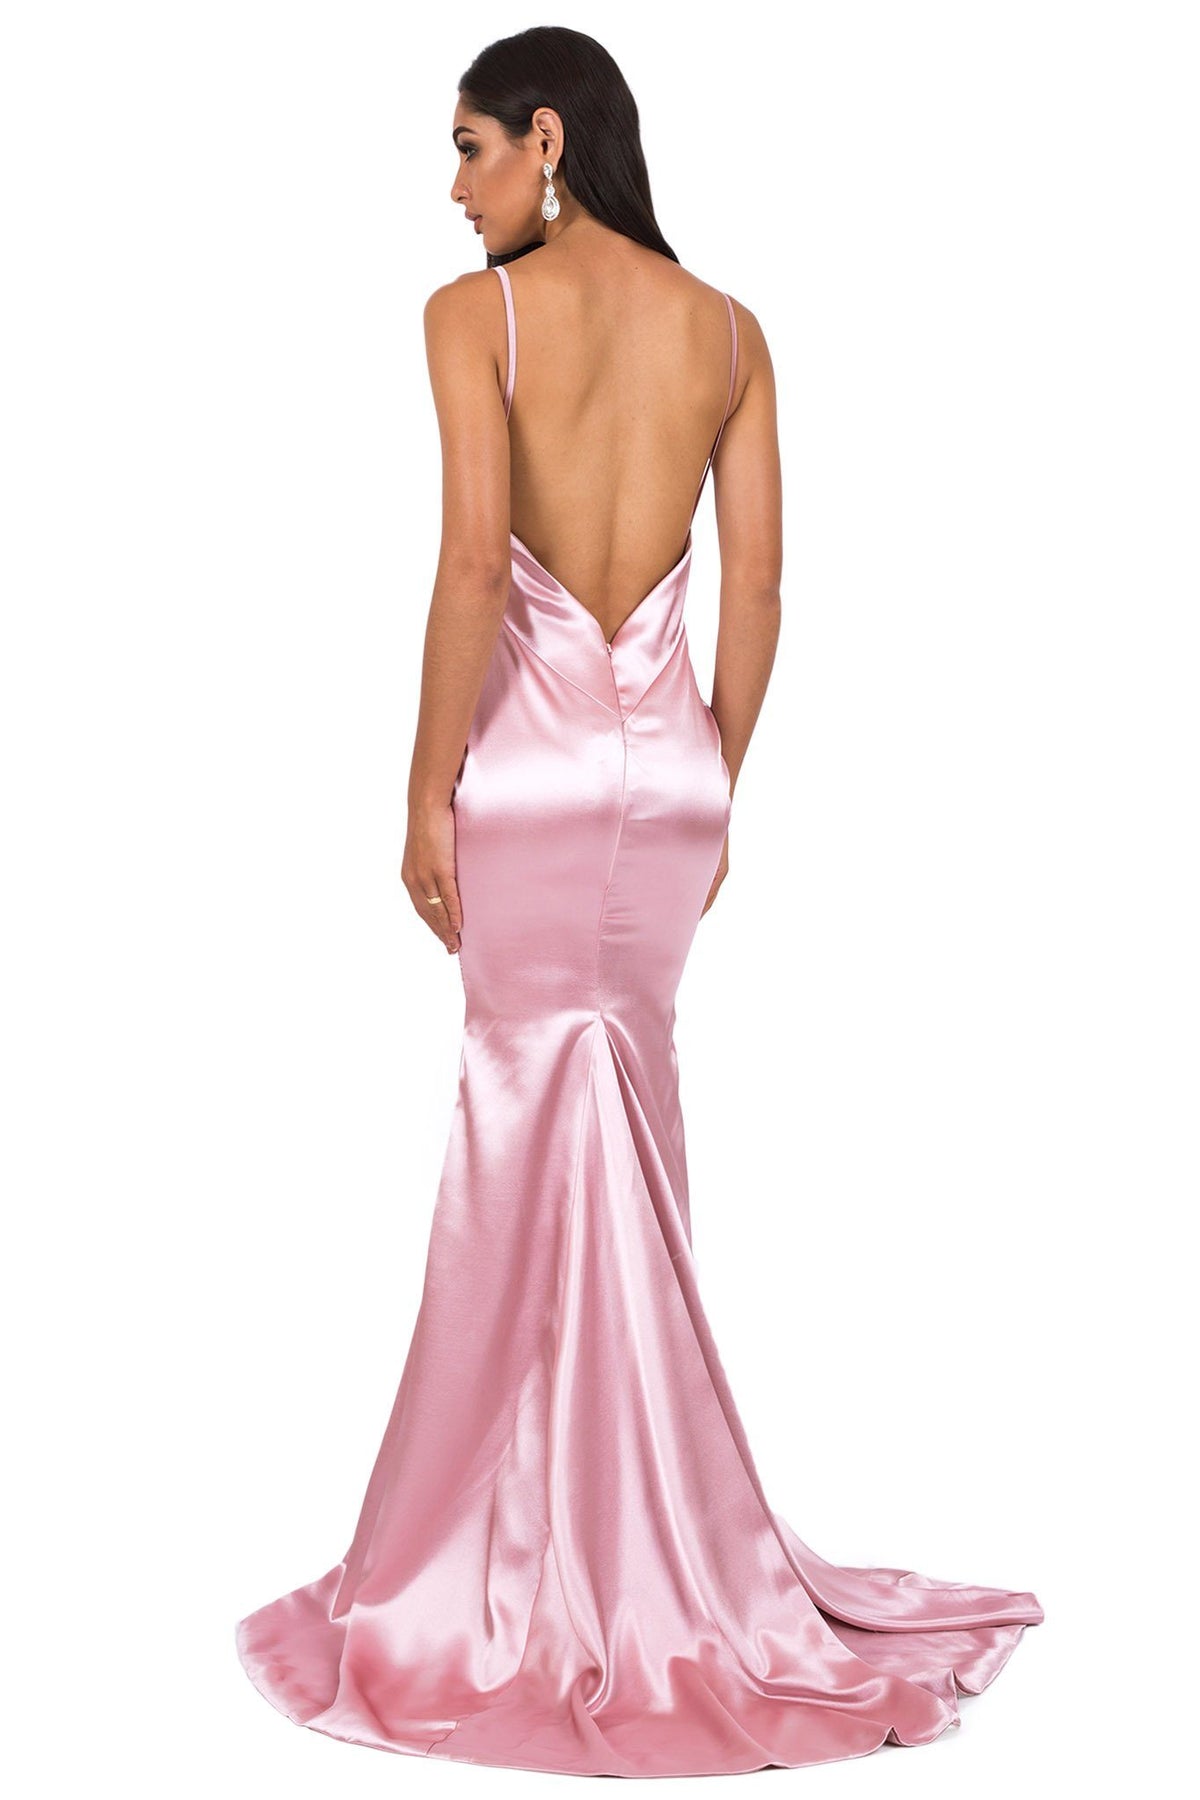 Back of blush pink silk satin floor length formal evening sleeveless gown with V neckline, thin shoulder straps, backless design and long train 